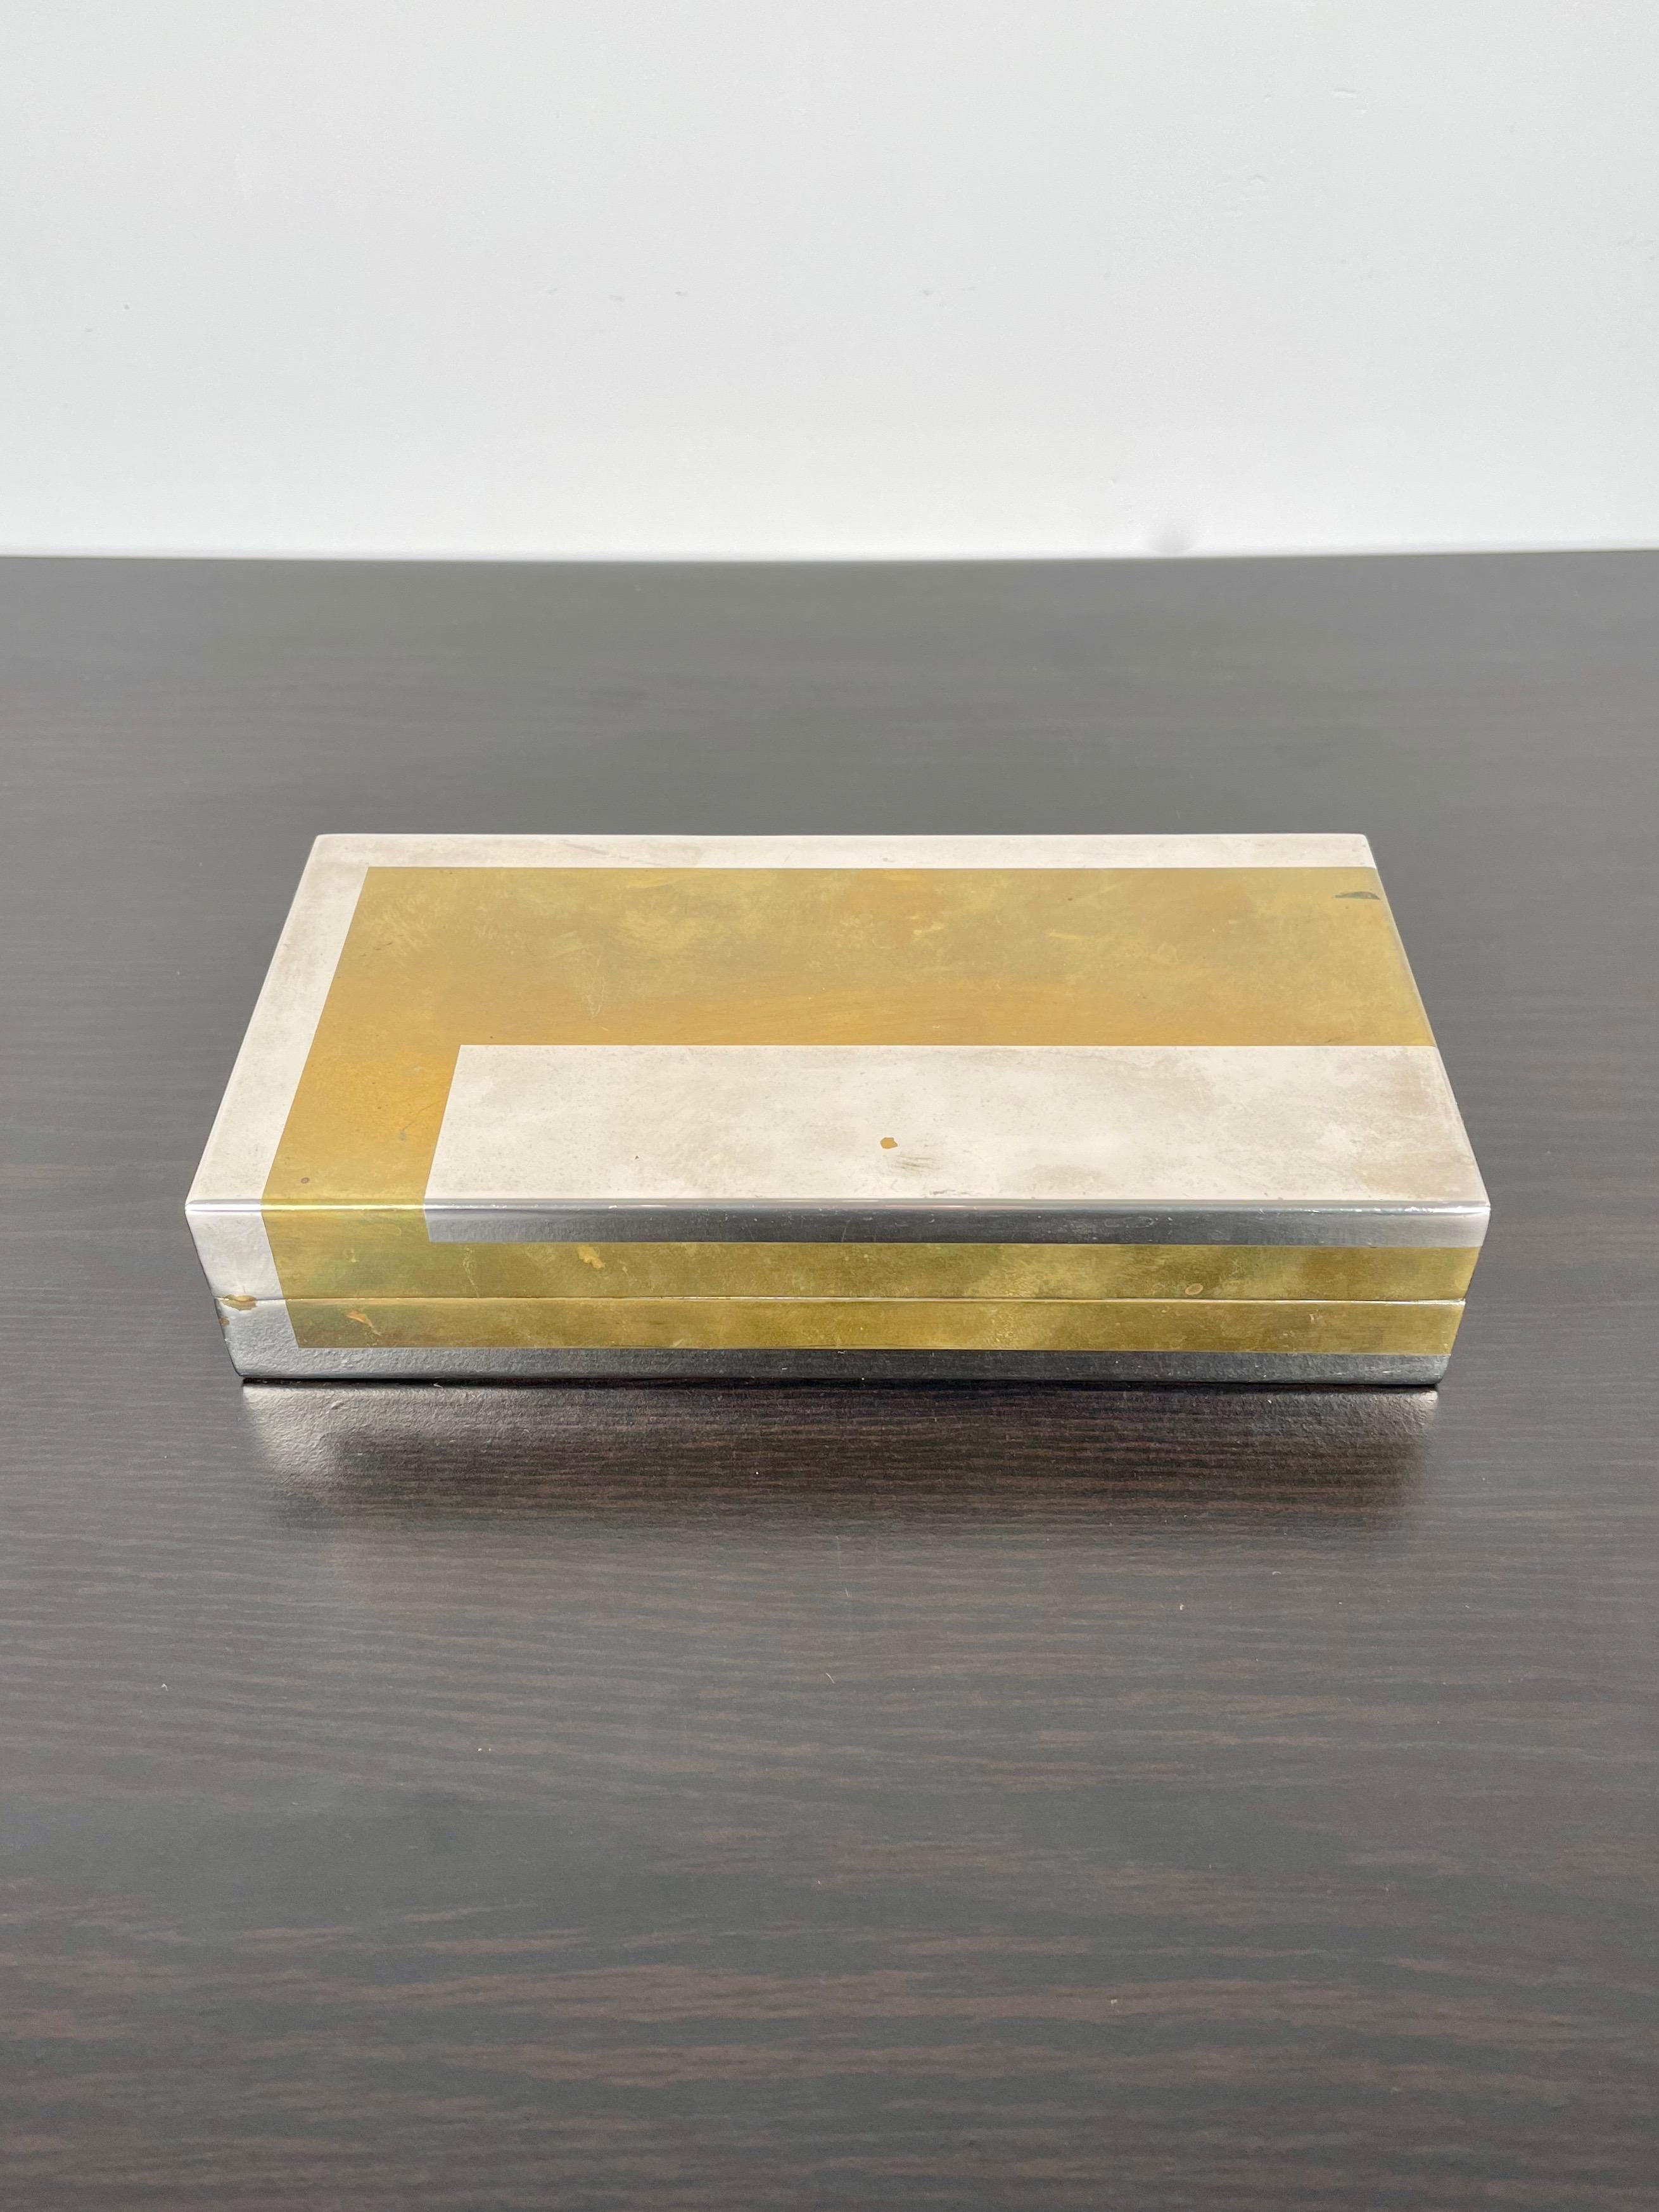 1970s chrome and brass box with black acrylic interior by the Italian designer Romeo Rega. His signature is engraved on the box as shown in photos.